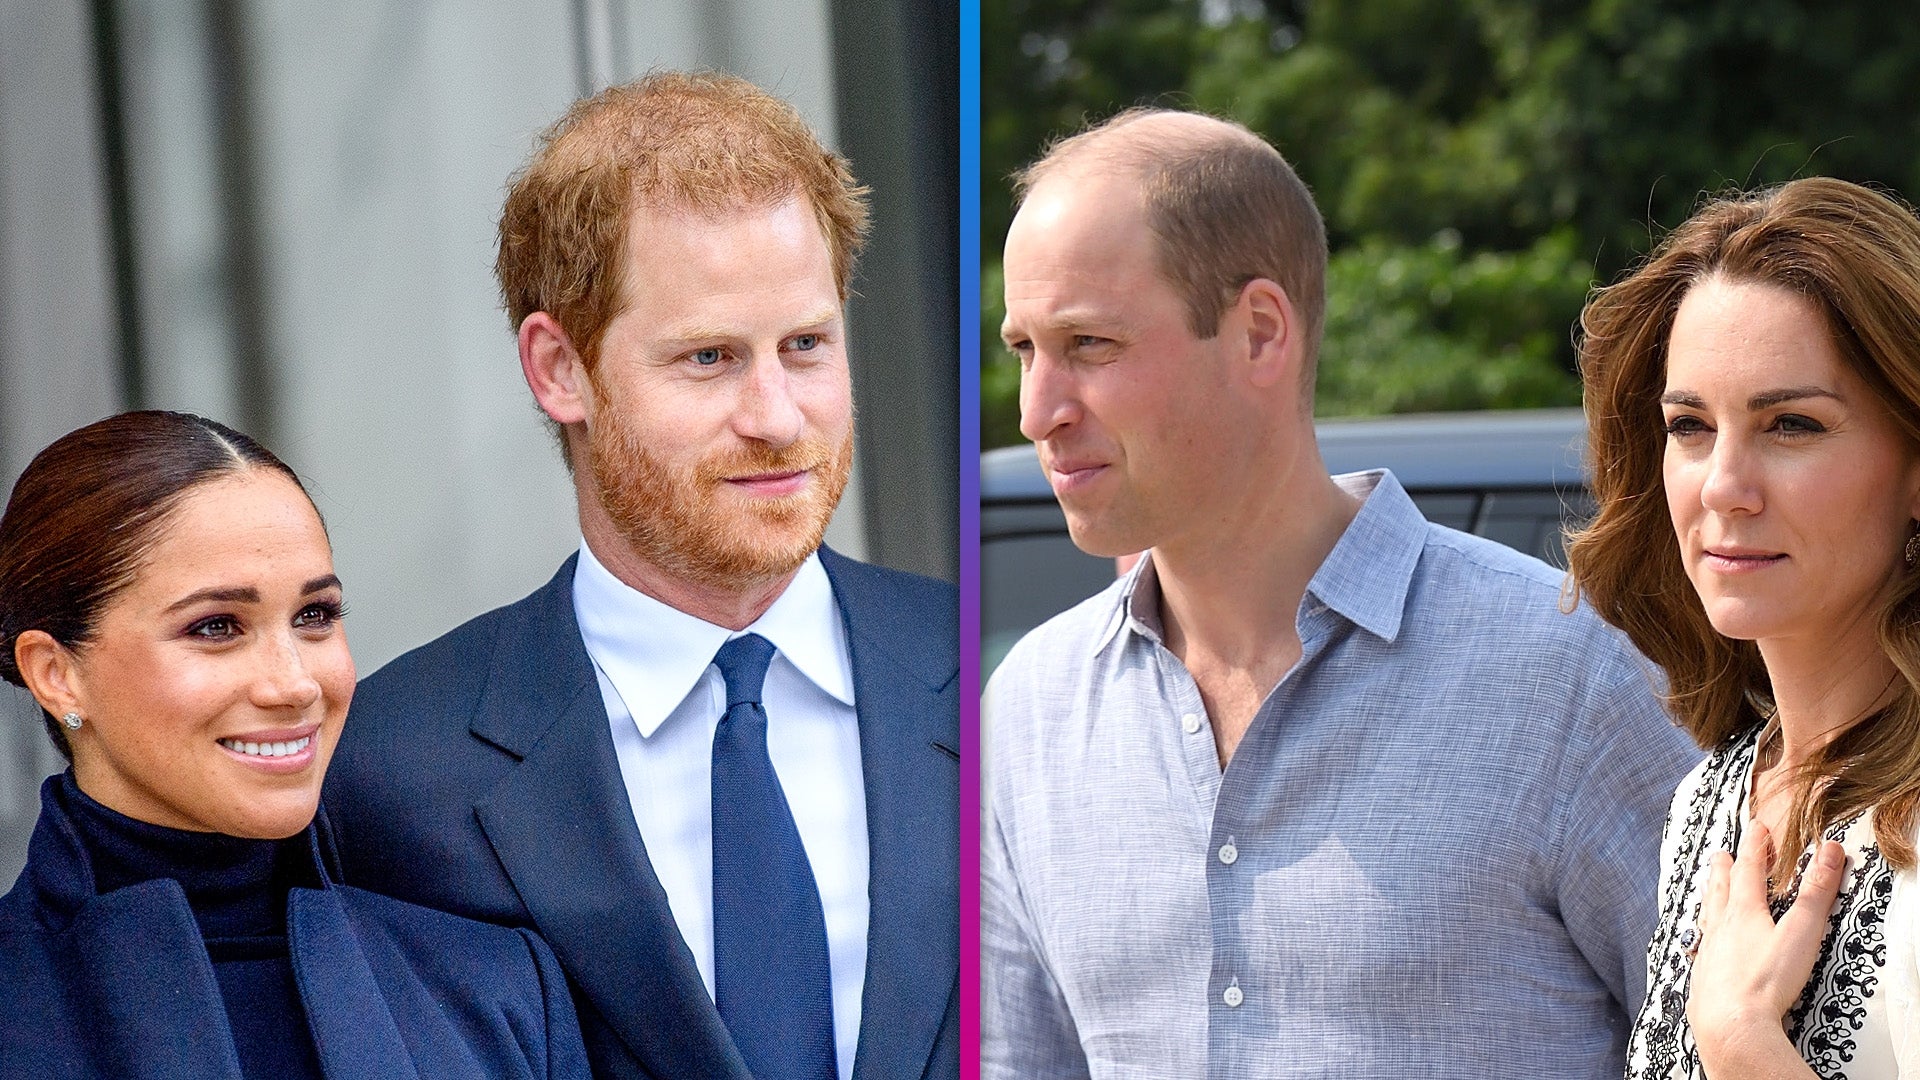 Prince William and Kate Middleton Not Reuniting With Prince Harry and Meghan Markle During U.S. Trip